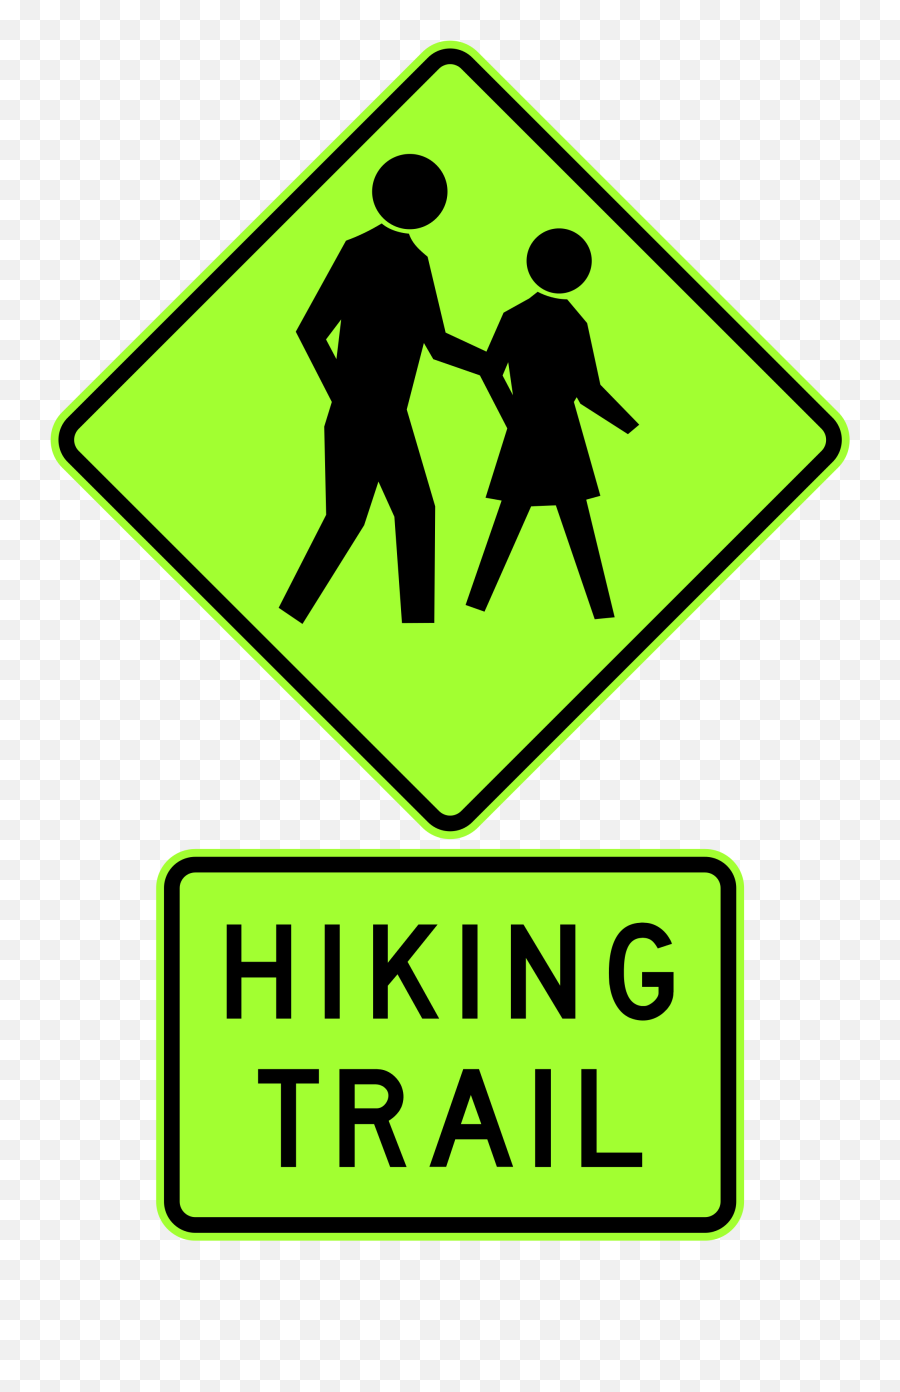 Hiking Clipart Trail Sign Picture - Two People Walking Sign Australian Pedestrian Warning Sign Emoji,Hiking Clipart